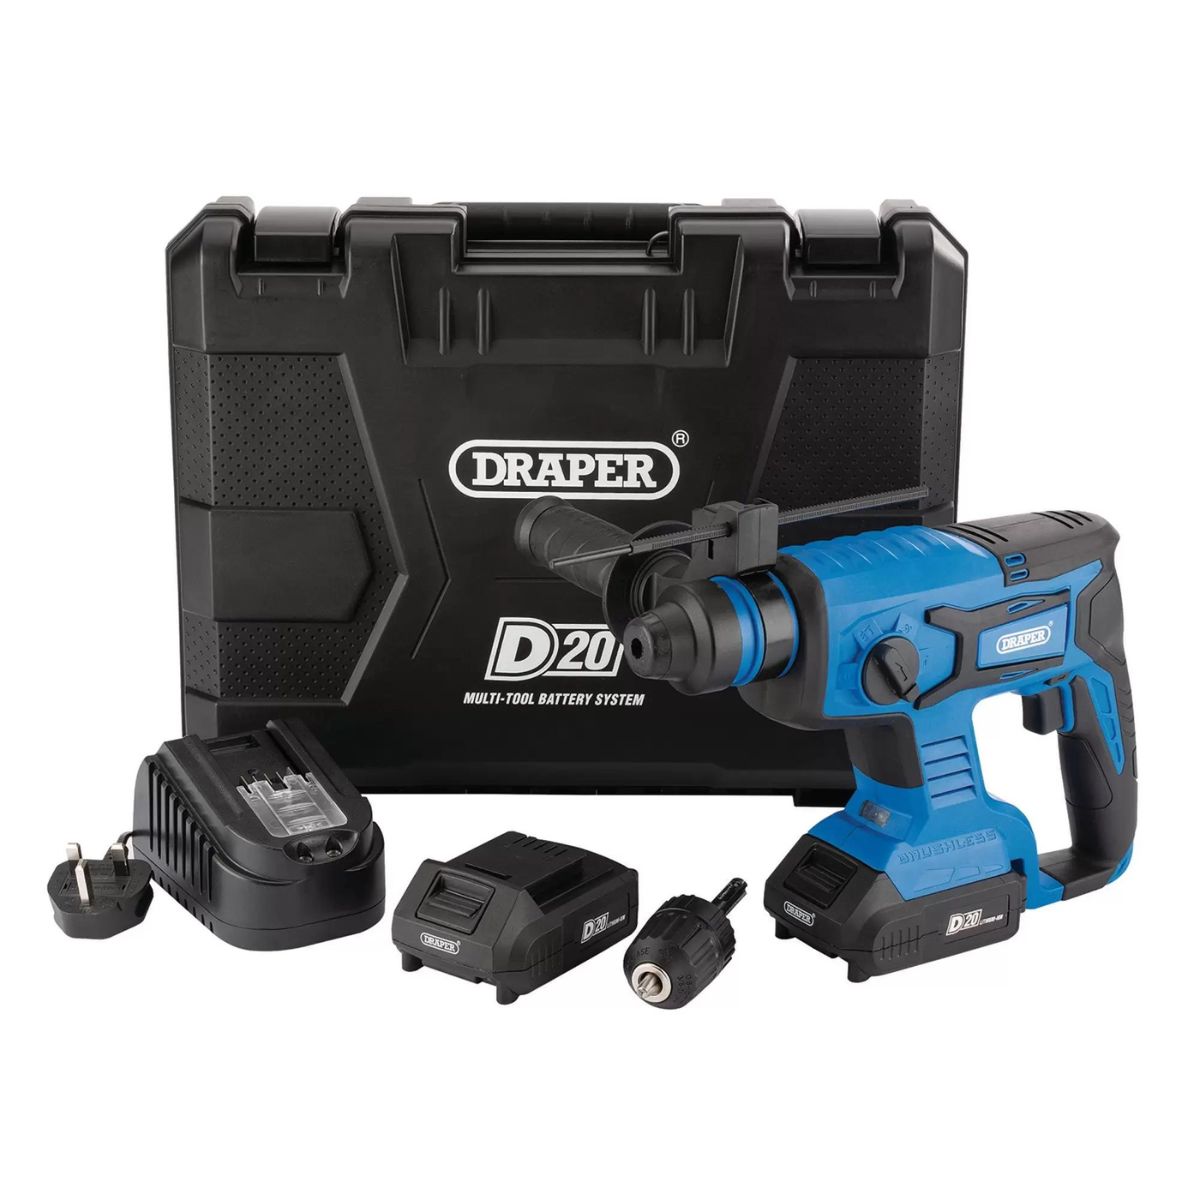 Draper D20SDSD1.7JSET 20V Brushless SDS + Rotary Hammer Drill 2 x 2.0Ah Batteries With Charger 00592